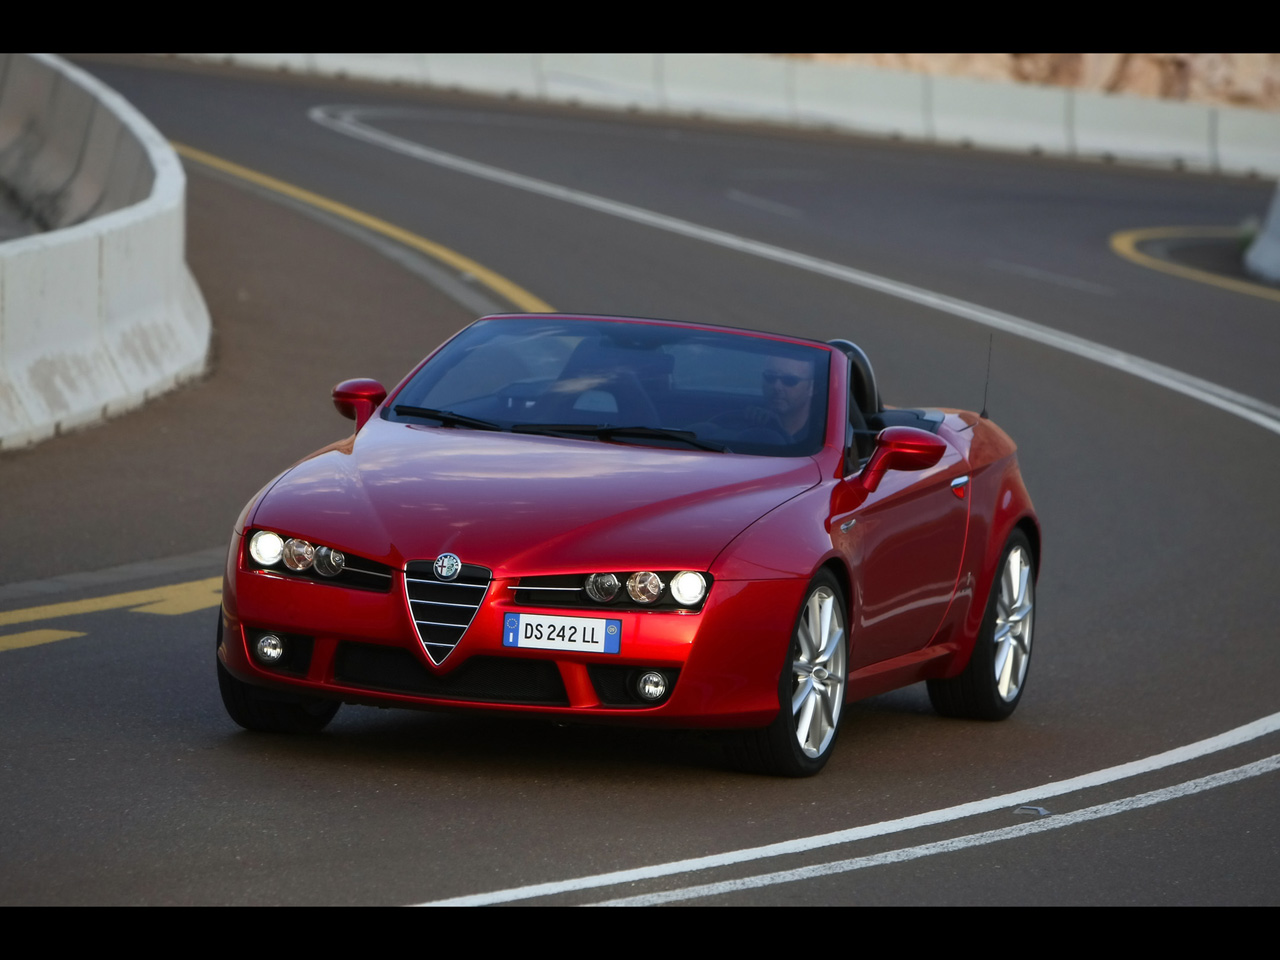 Front luxury Alfa Romeo Spider car in red color 2 doors and ...